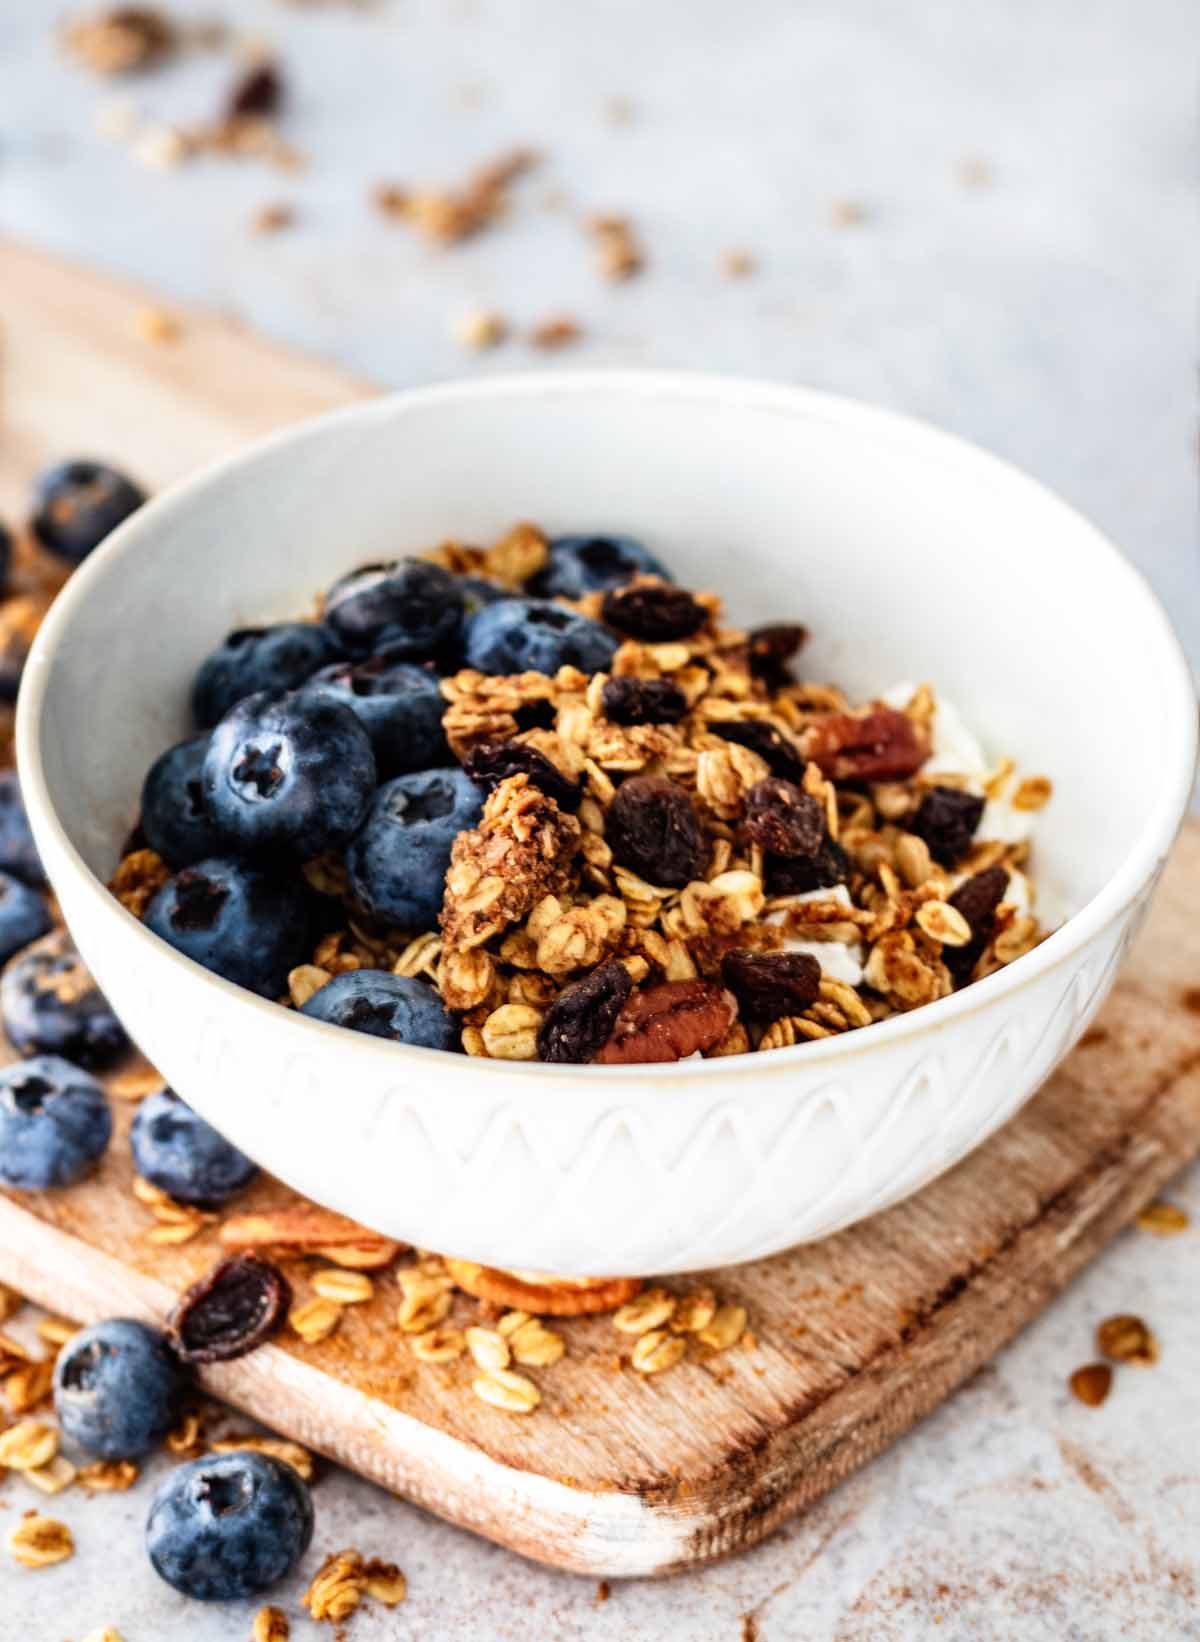 Cinnamon granola in a white ceramic bowl on a wooden cutting board with fresh blueberries